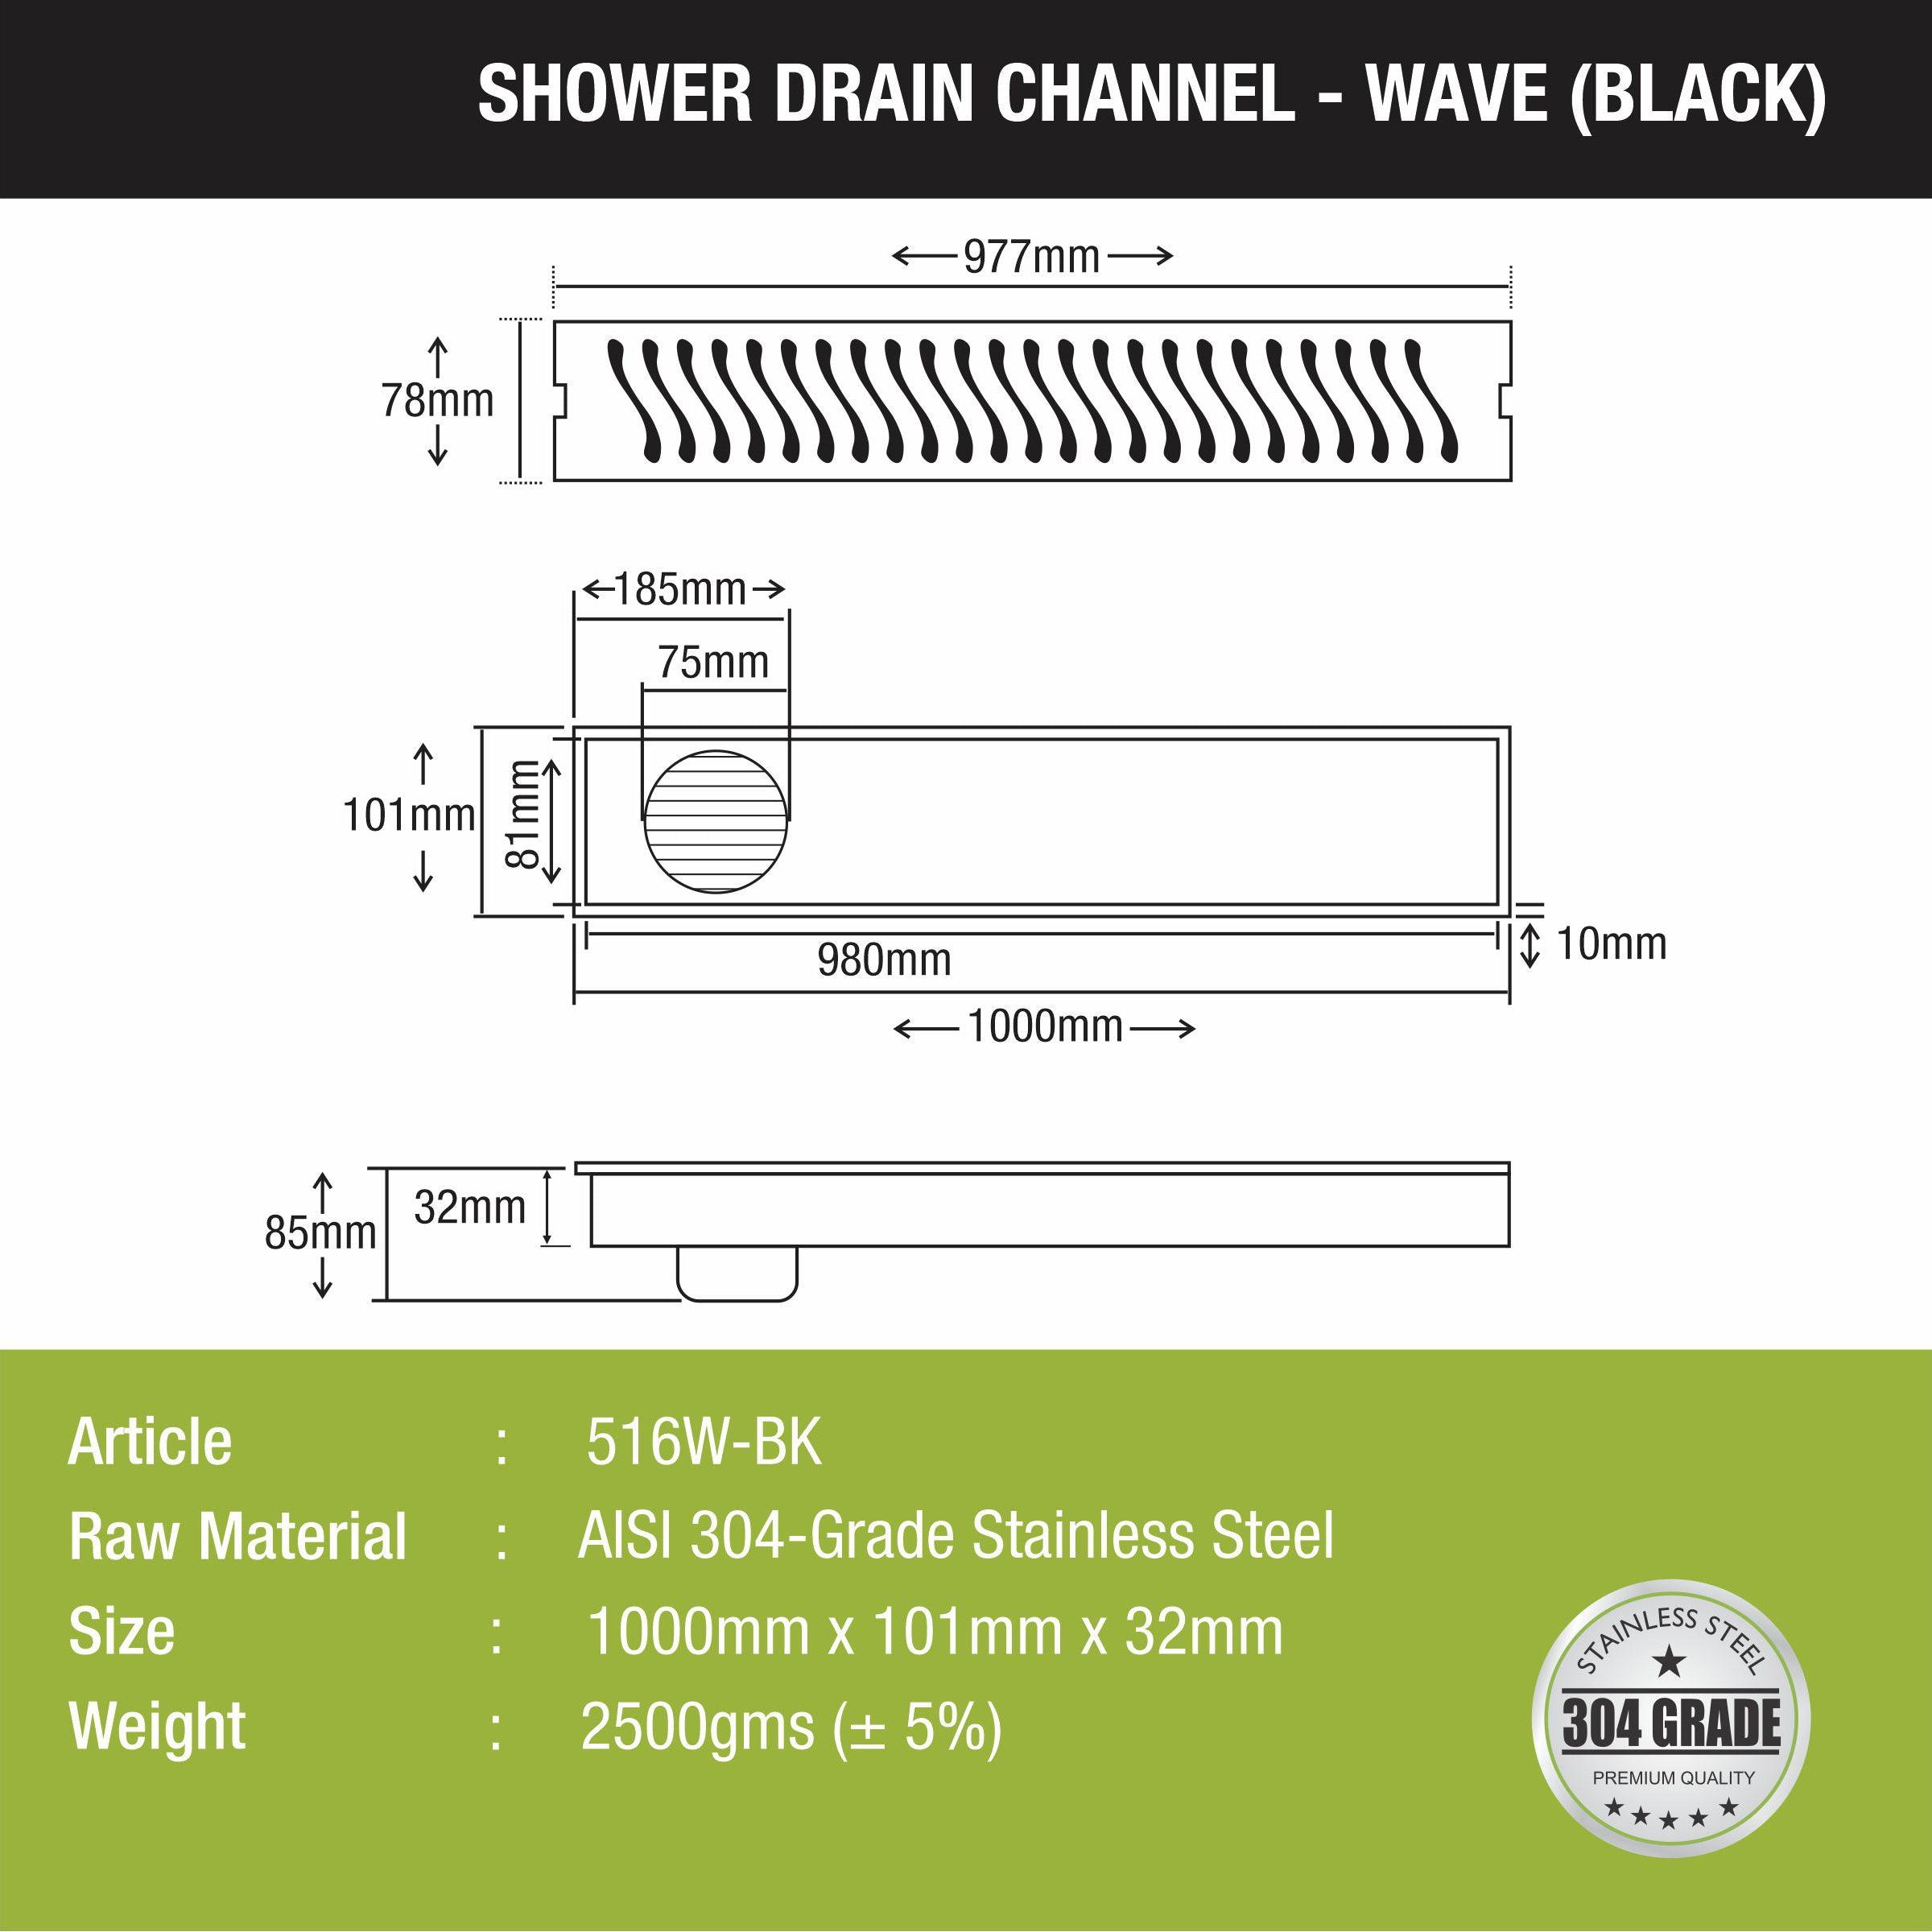 Wave Shower Drain Channel - Black (40 x 4 Inches) size and measurement